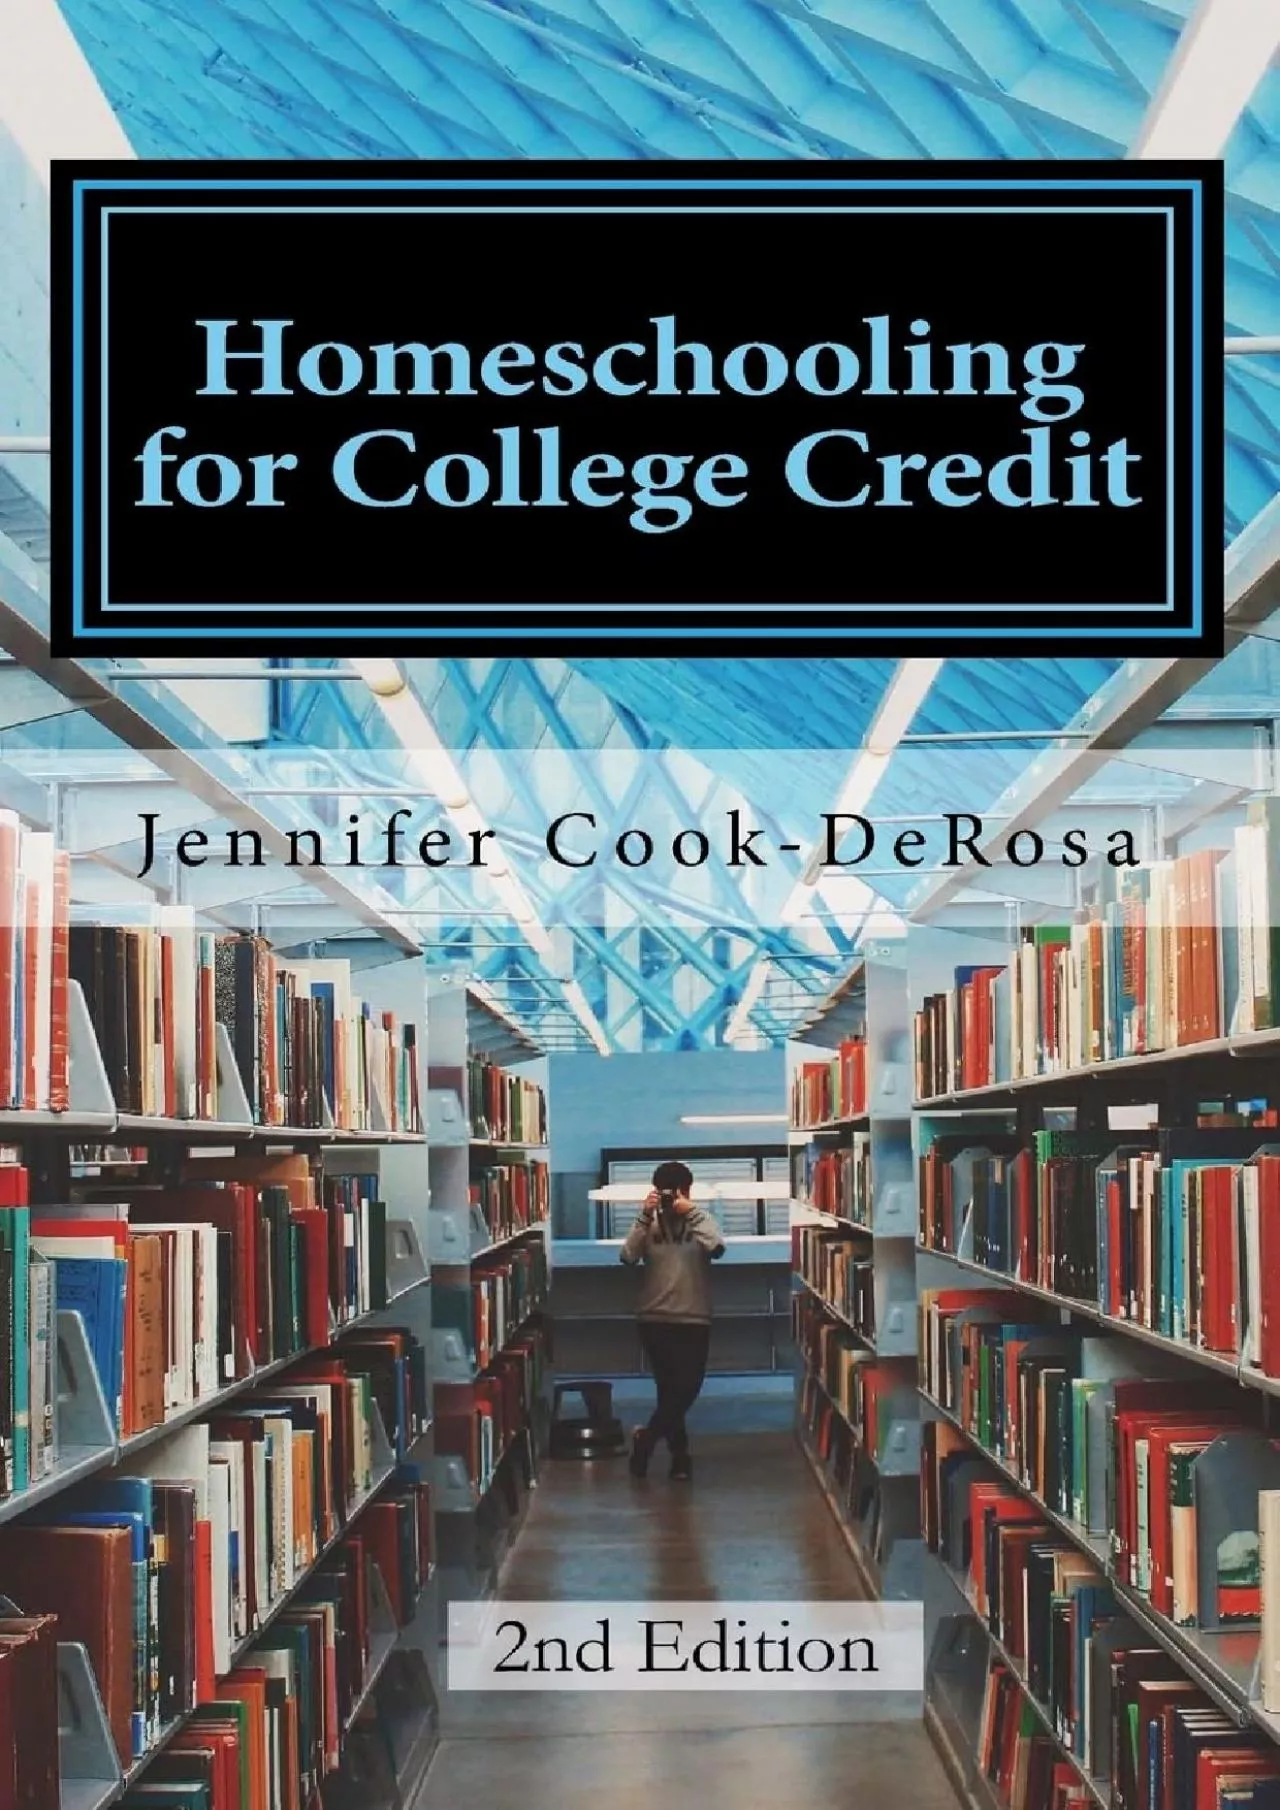 [EBOOK] Homeschooling for College Credit: A Parents Guide to Resourceful High School Planning